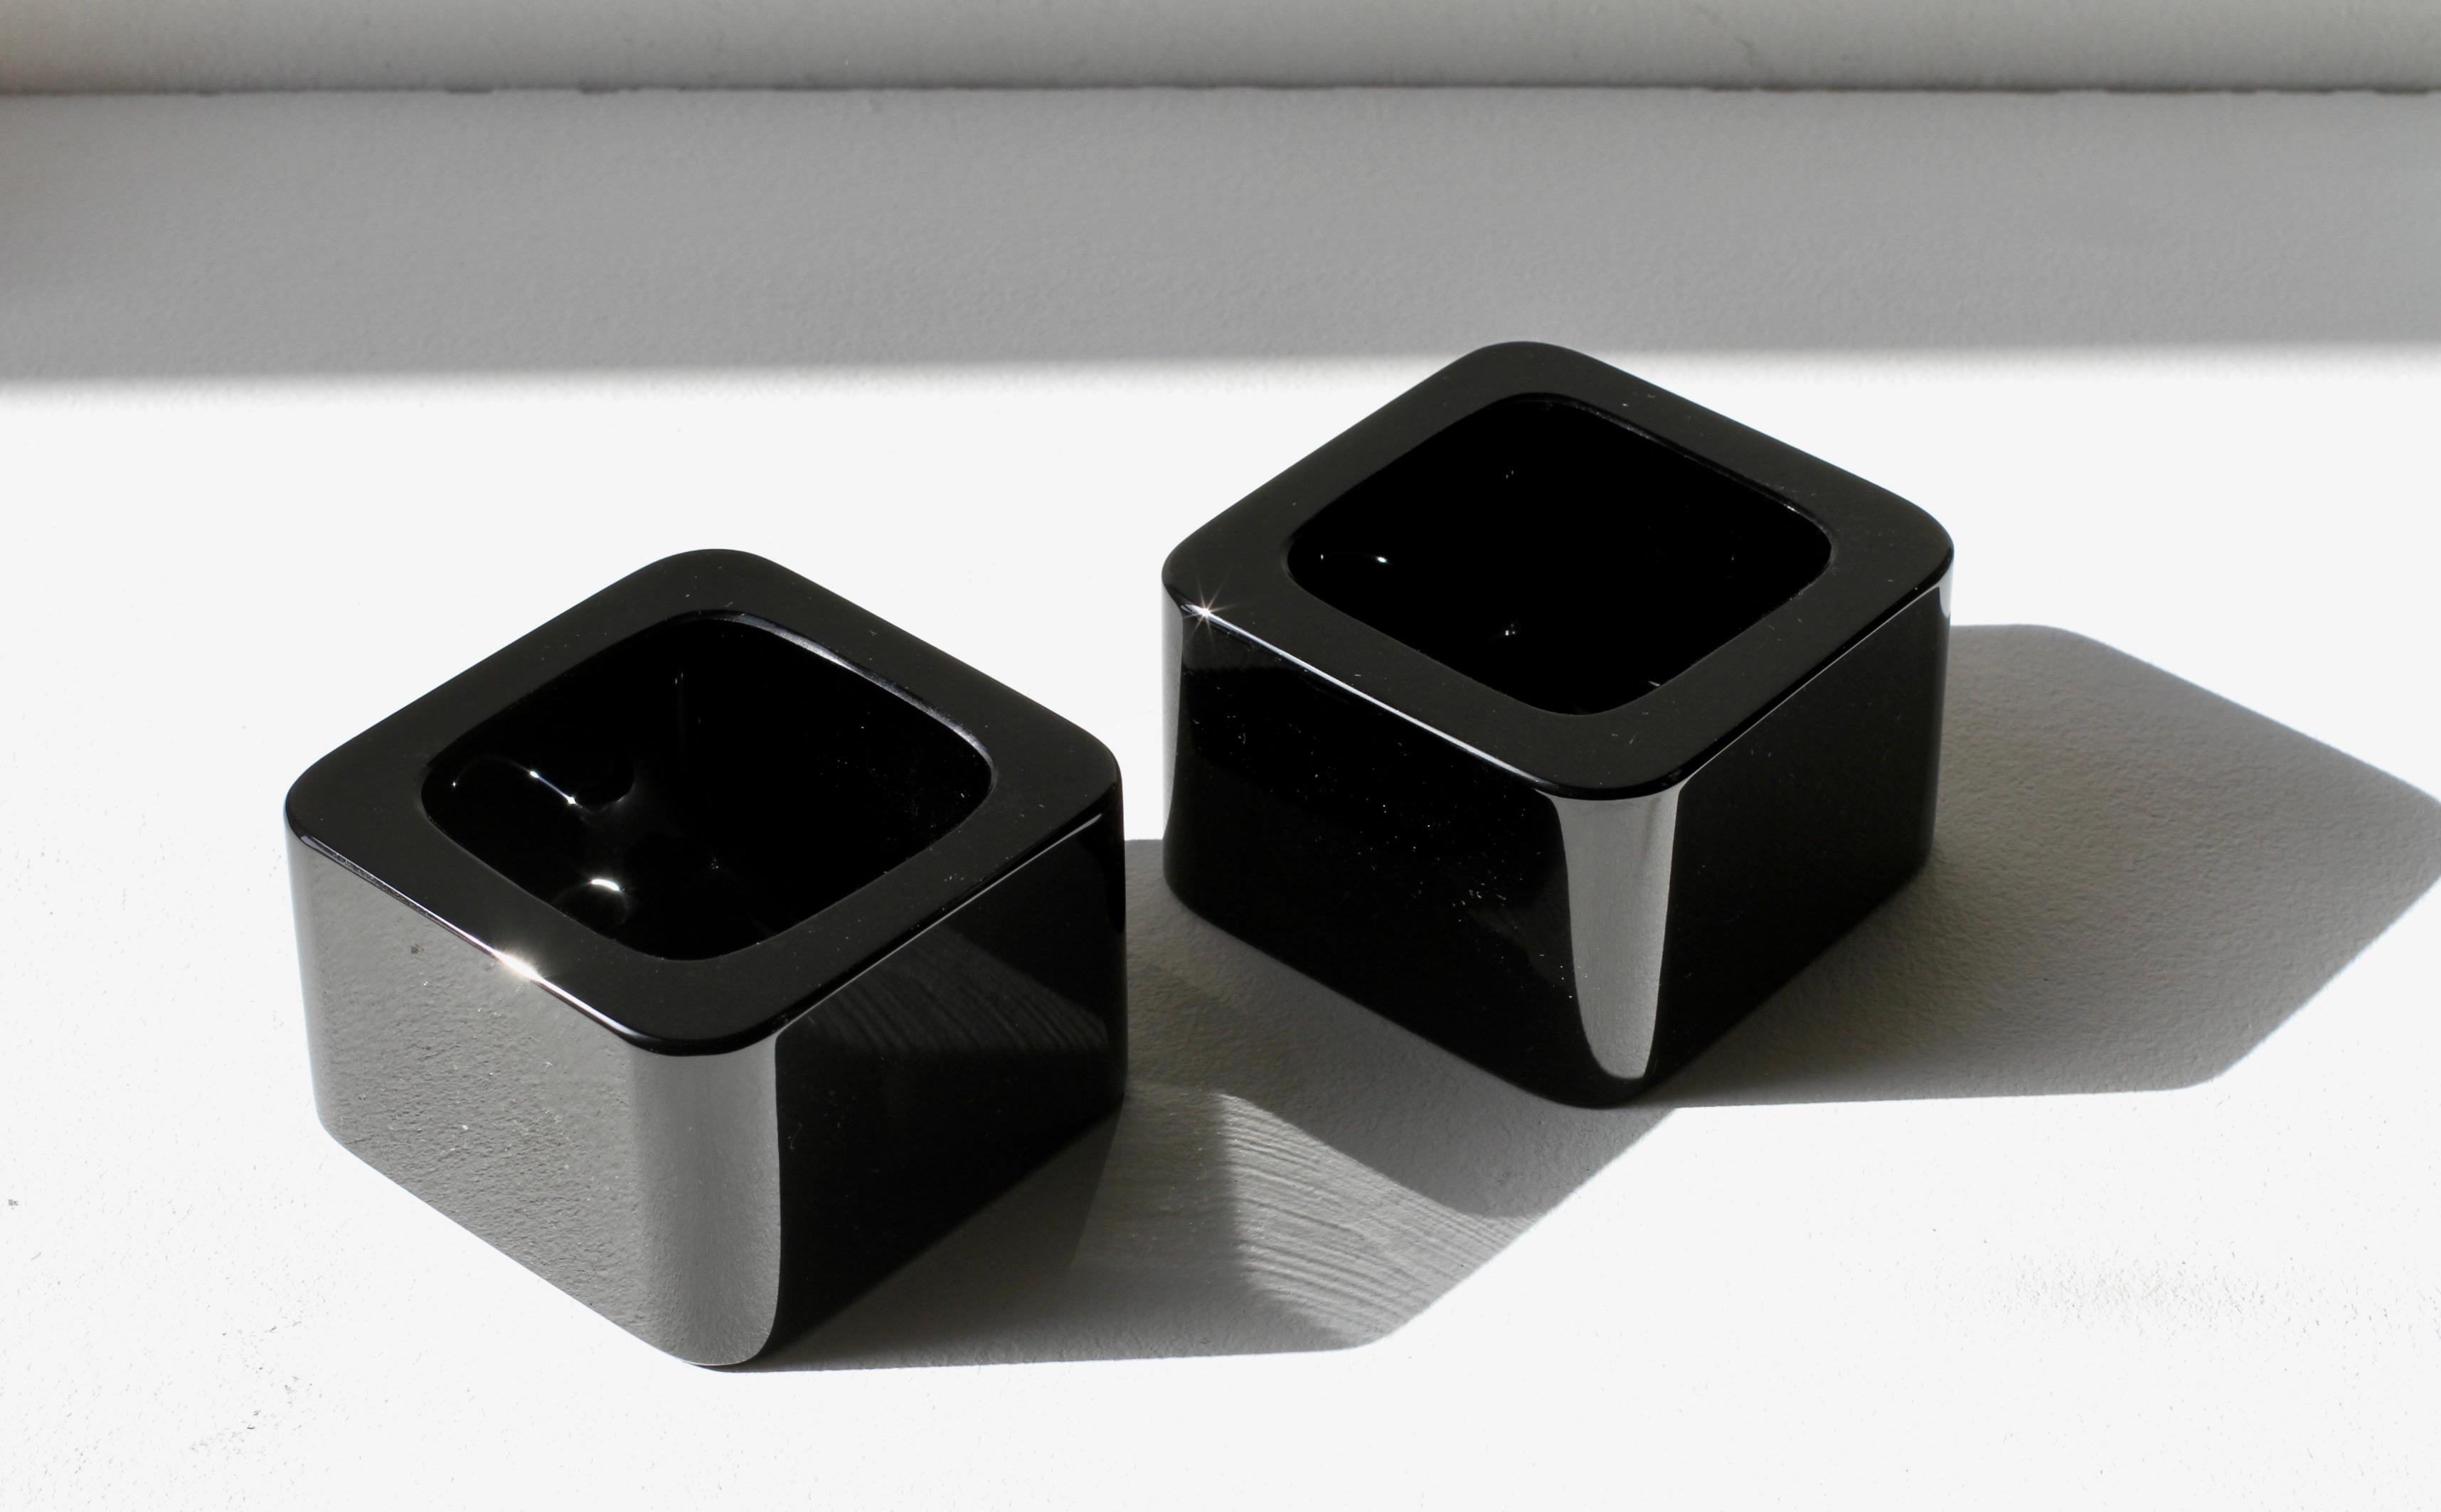 Petite pair of Karl Springer style black colored / coloured square vintage mid-century modern Murano glass bowls, dishes or ashtrays by Seguso Vetri d'Arte Murano, Italy circa 1980s. Elegant and simplistic in form. Black is a particularly difficult